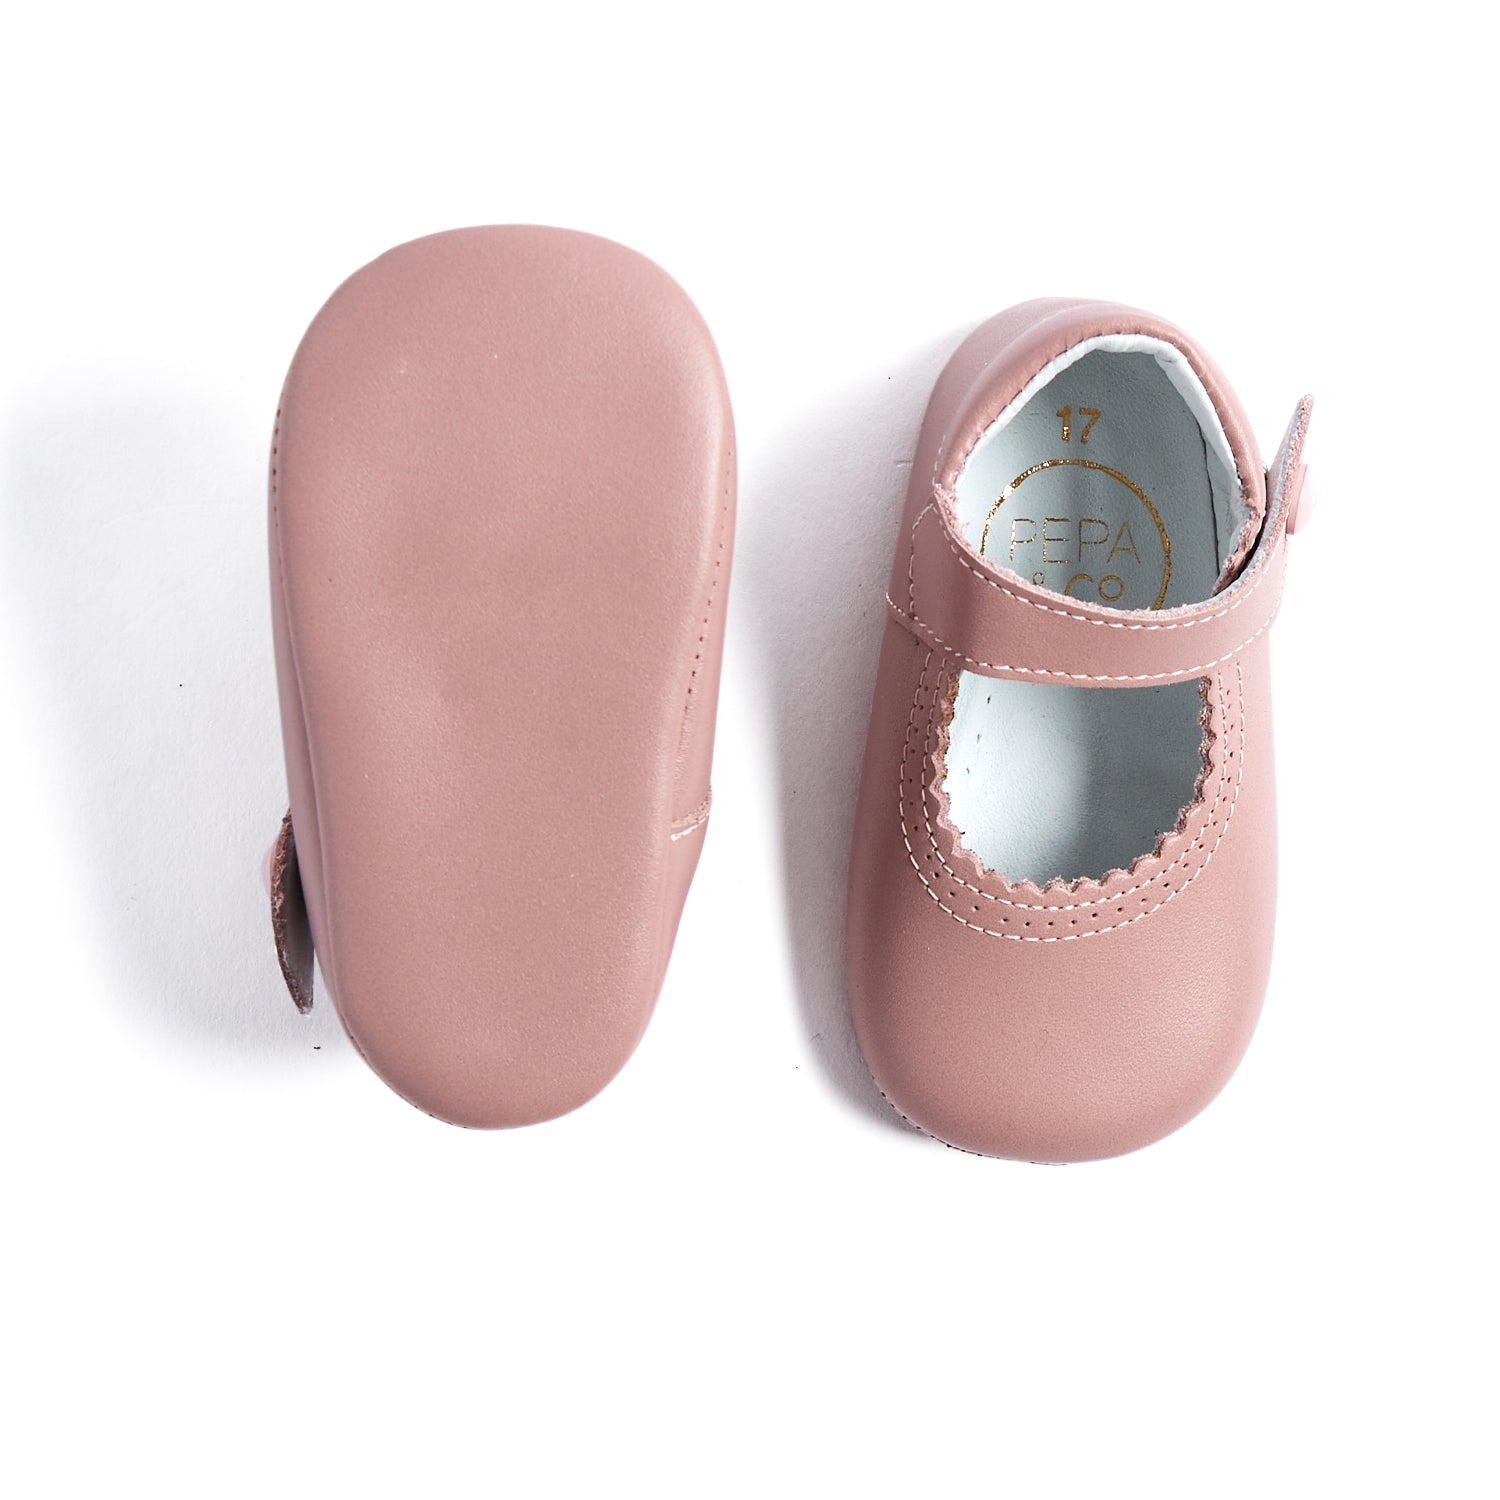 Leather Pink Mary Jane Pram Shoes Shoes  from Pepa London